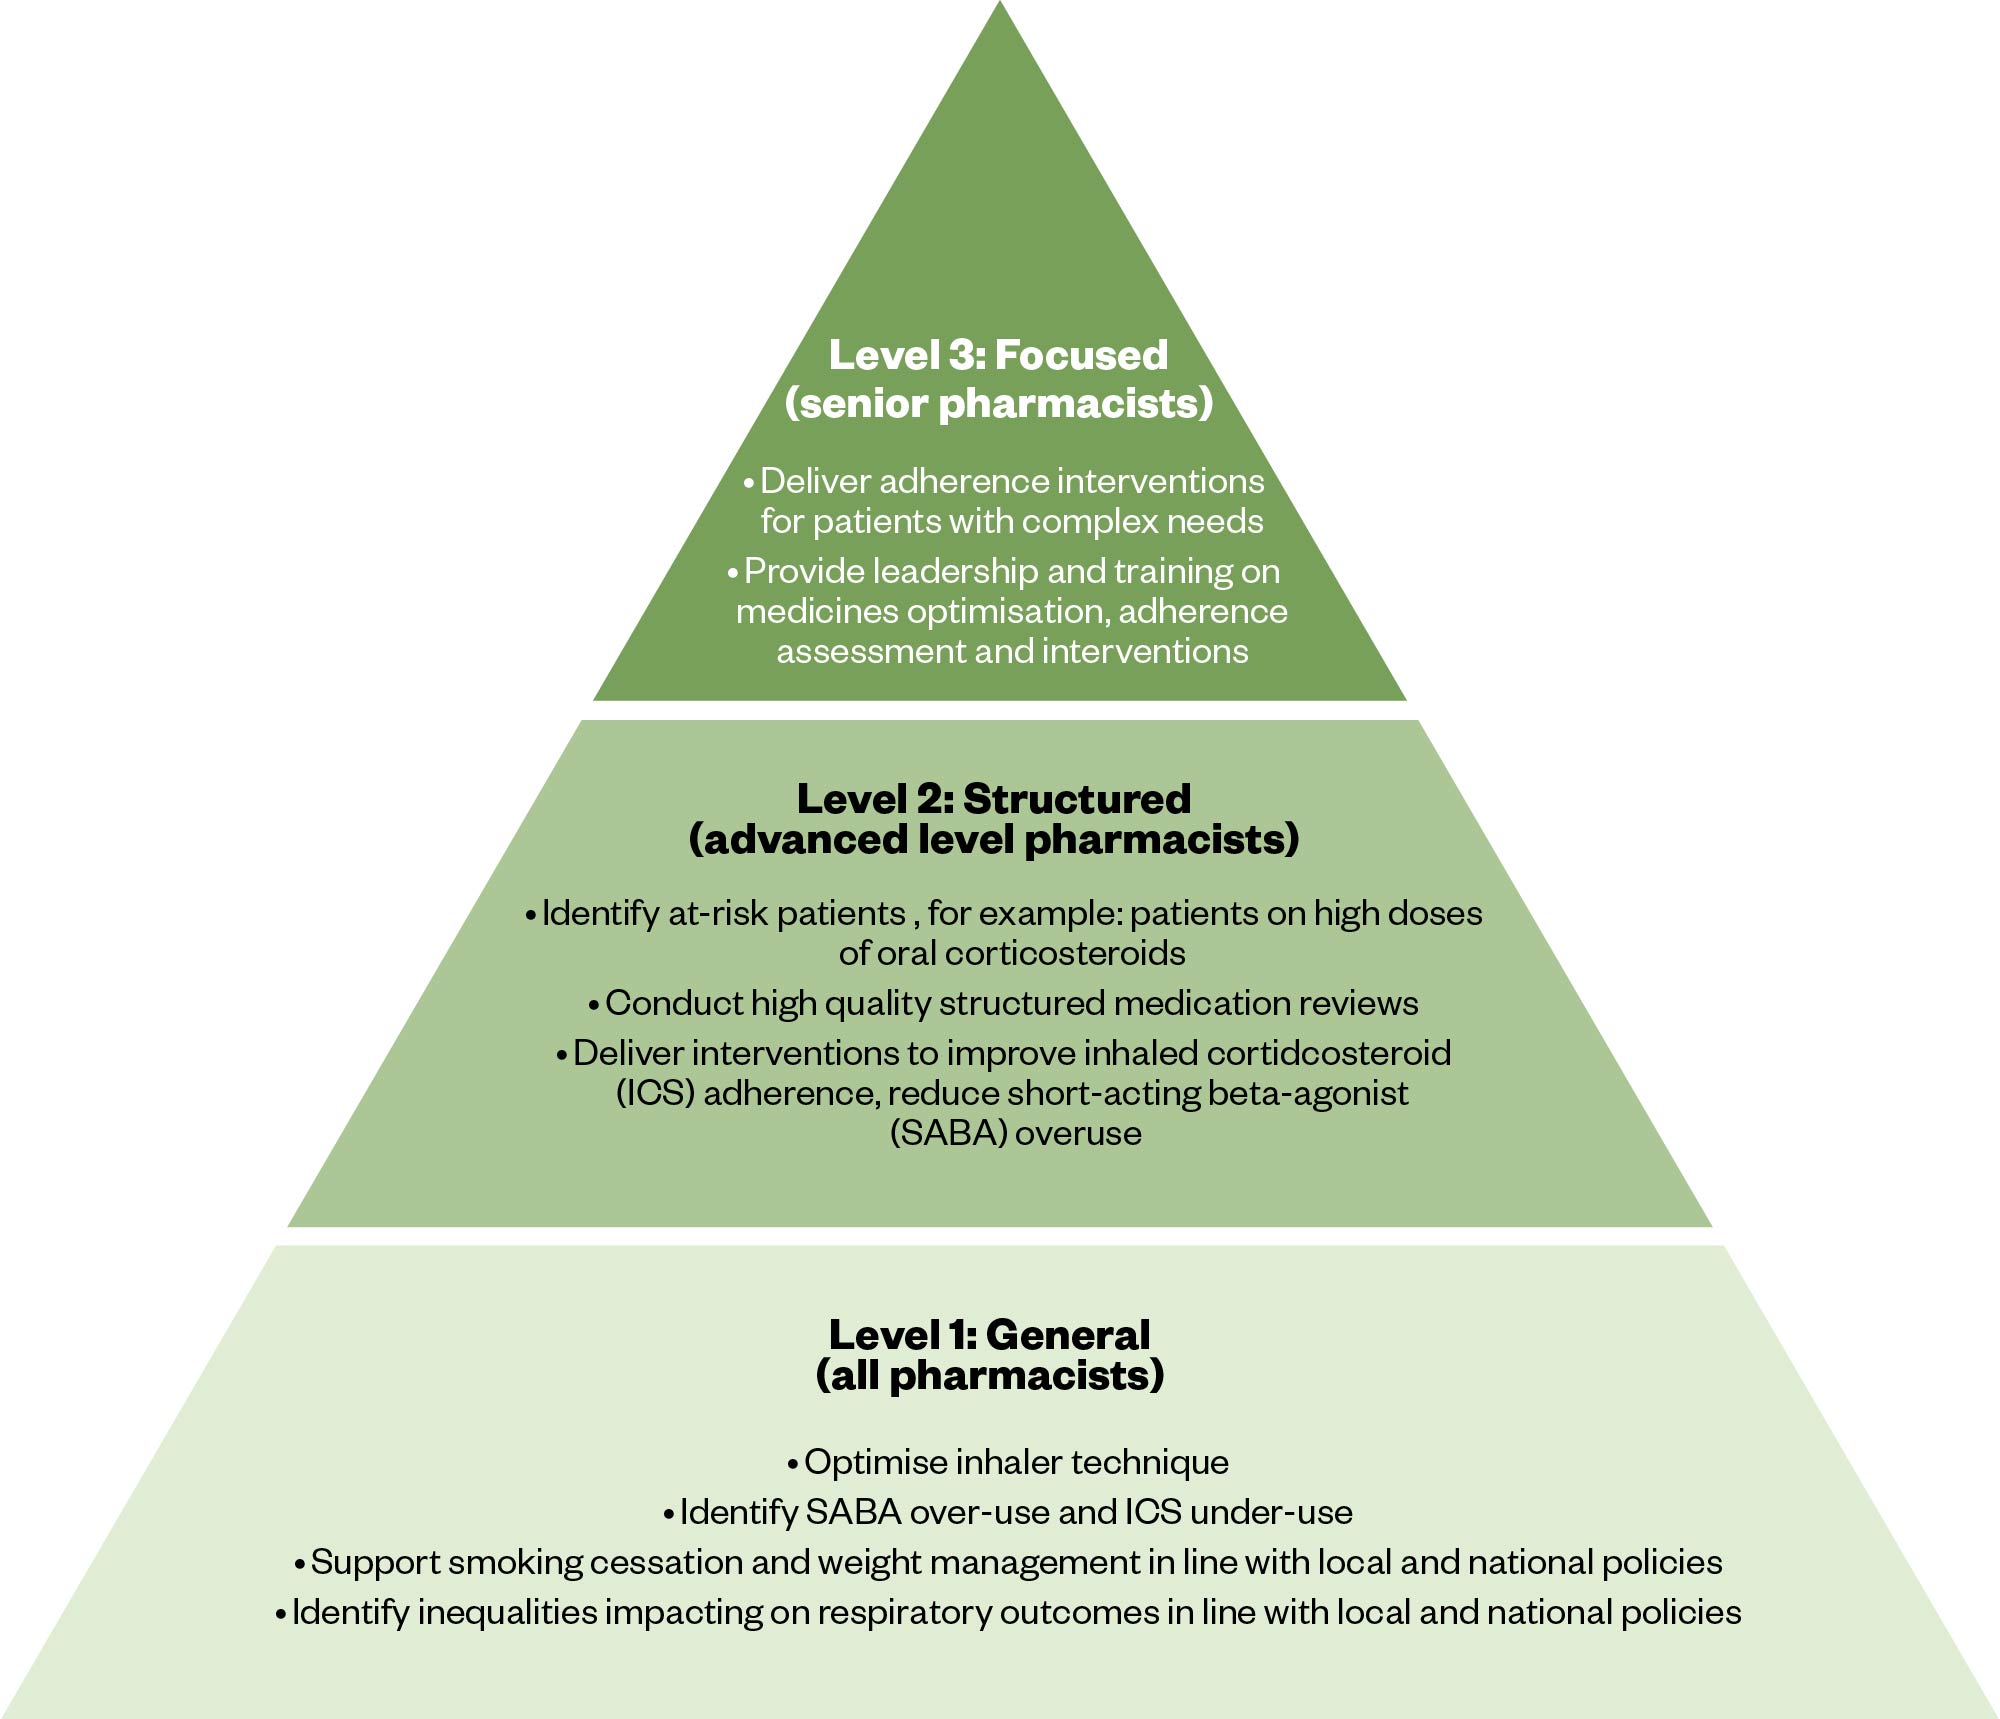 Pyramid diagram showing the structure of the integrated care model, with level one (general), level two (structured) and level three (focused).